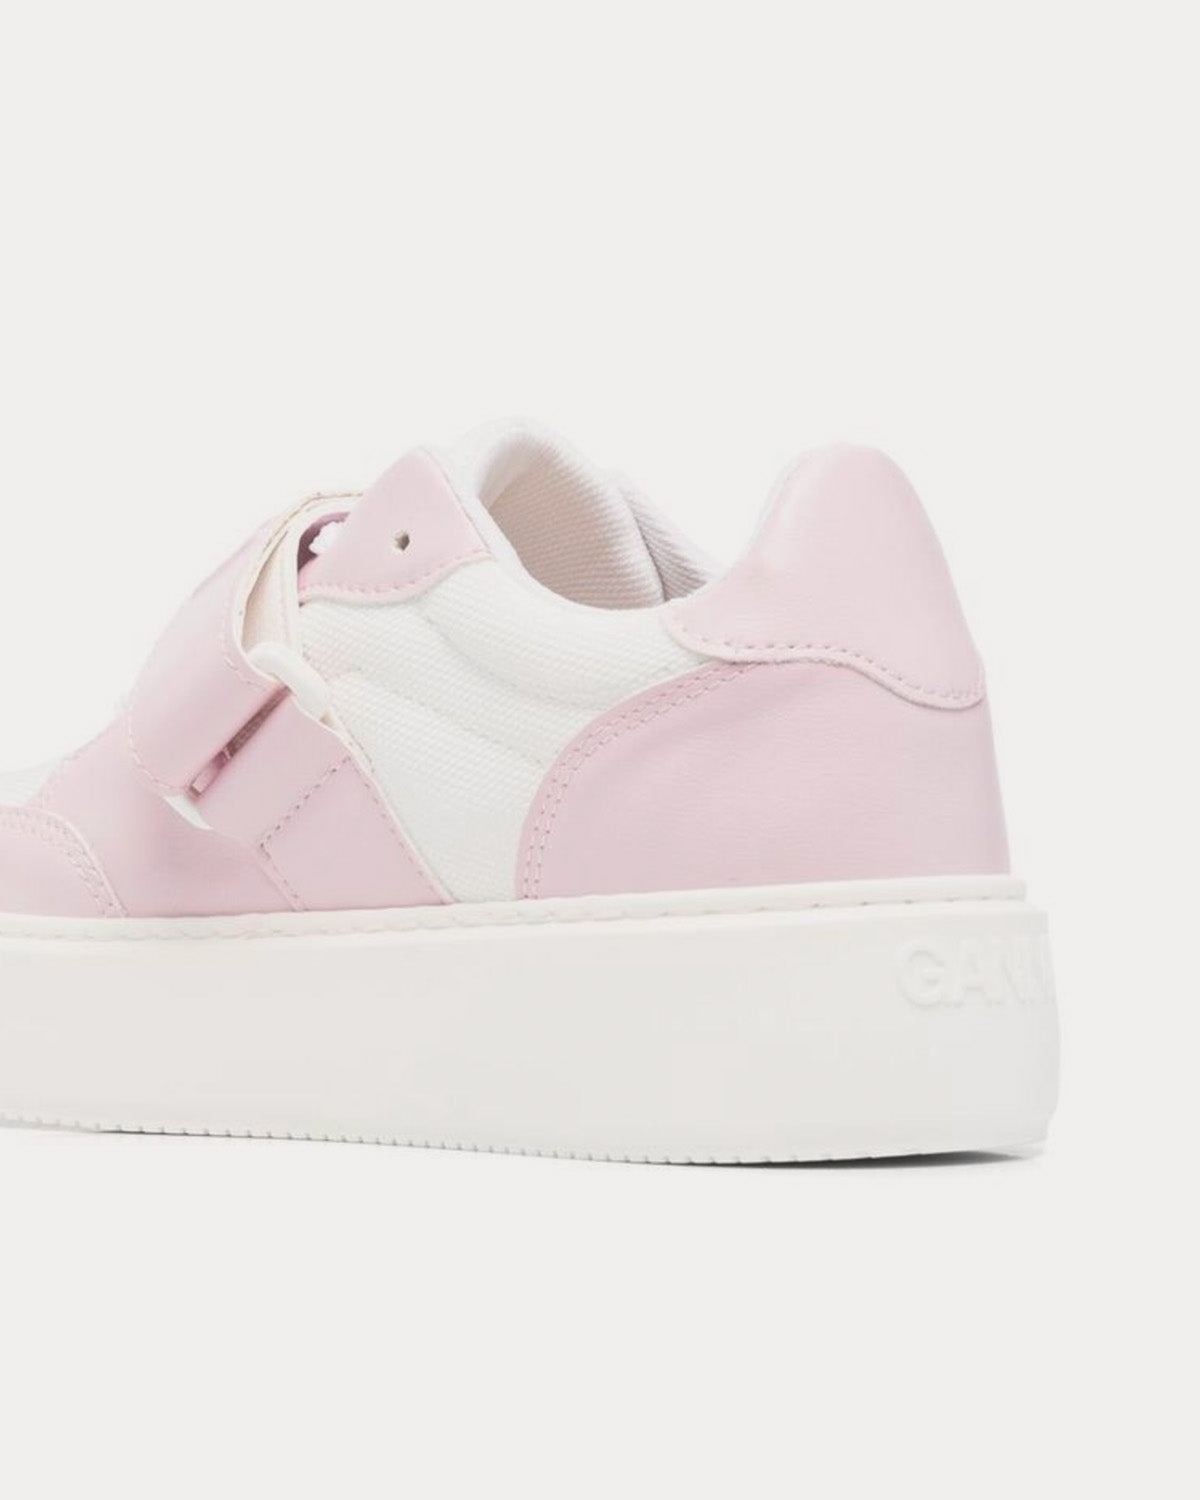 Ganni - Sporty Cupsole Pink / White Low Top Sneakers